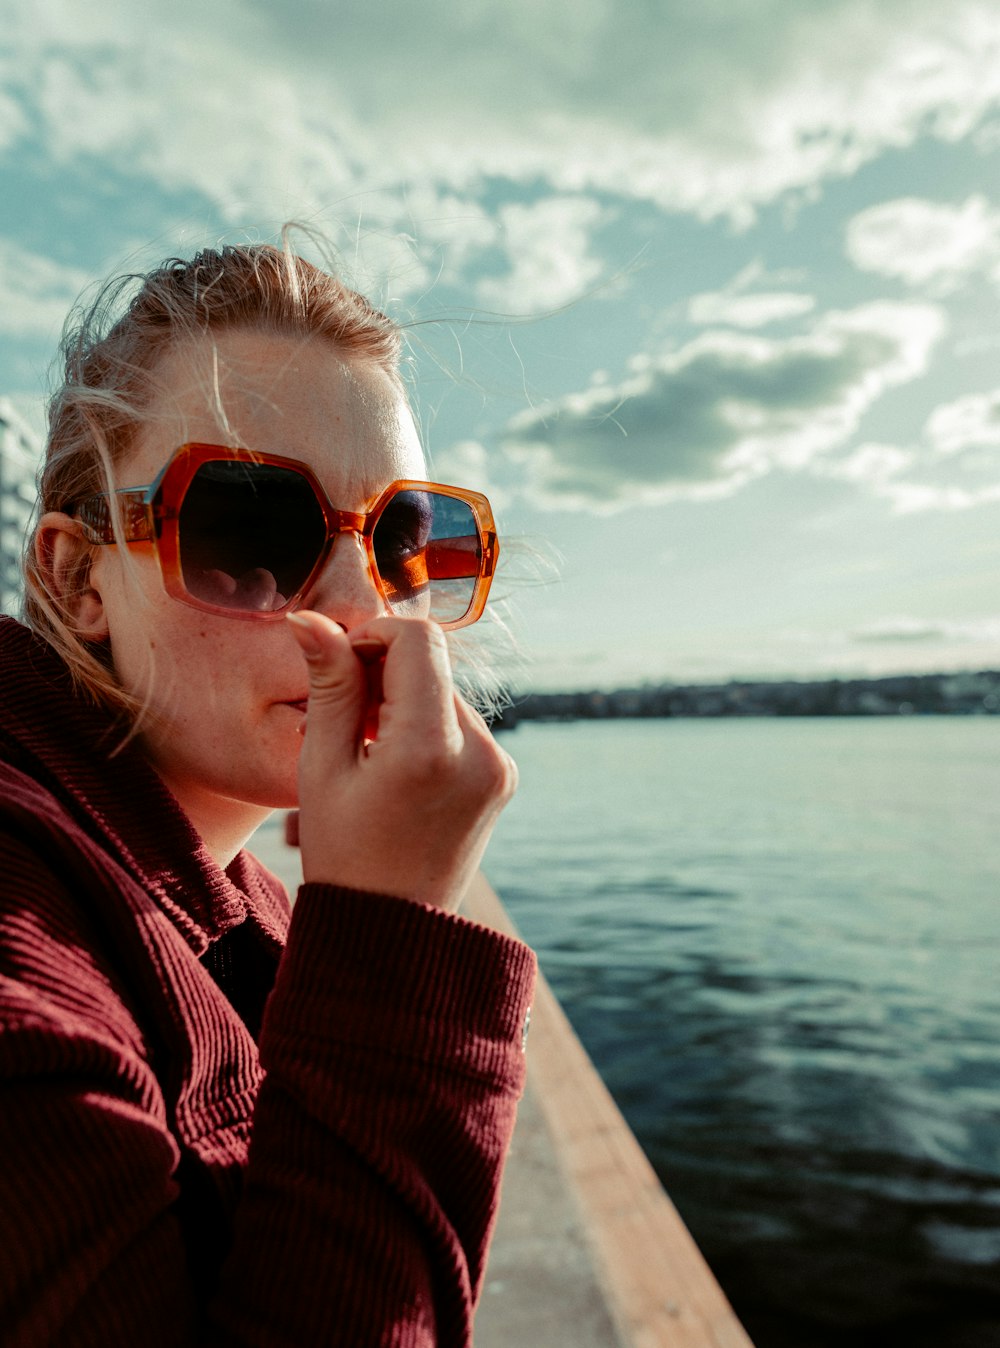 a woman wearing sunglasses looking out over a body of water